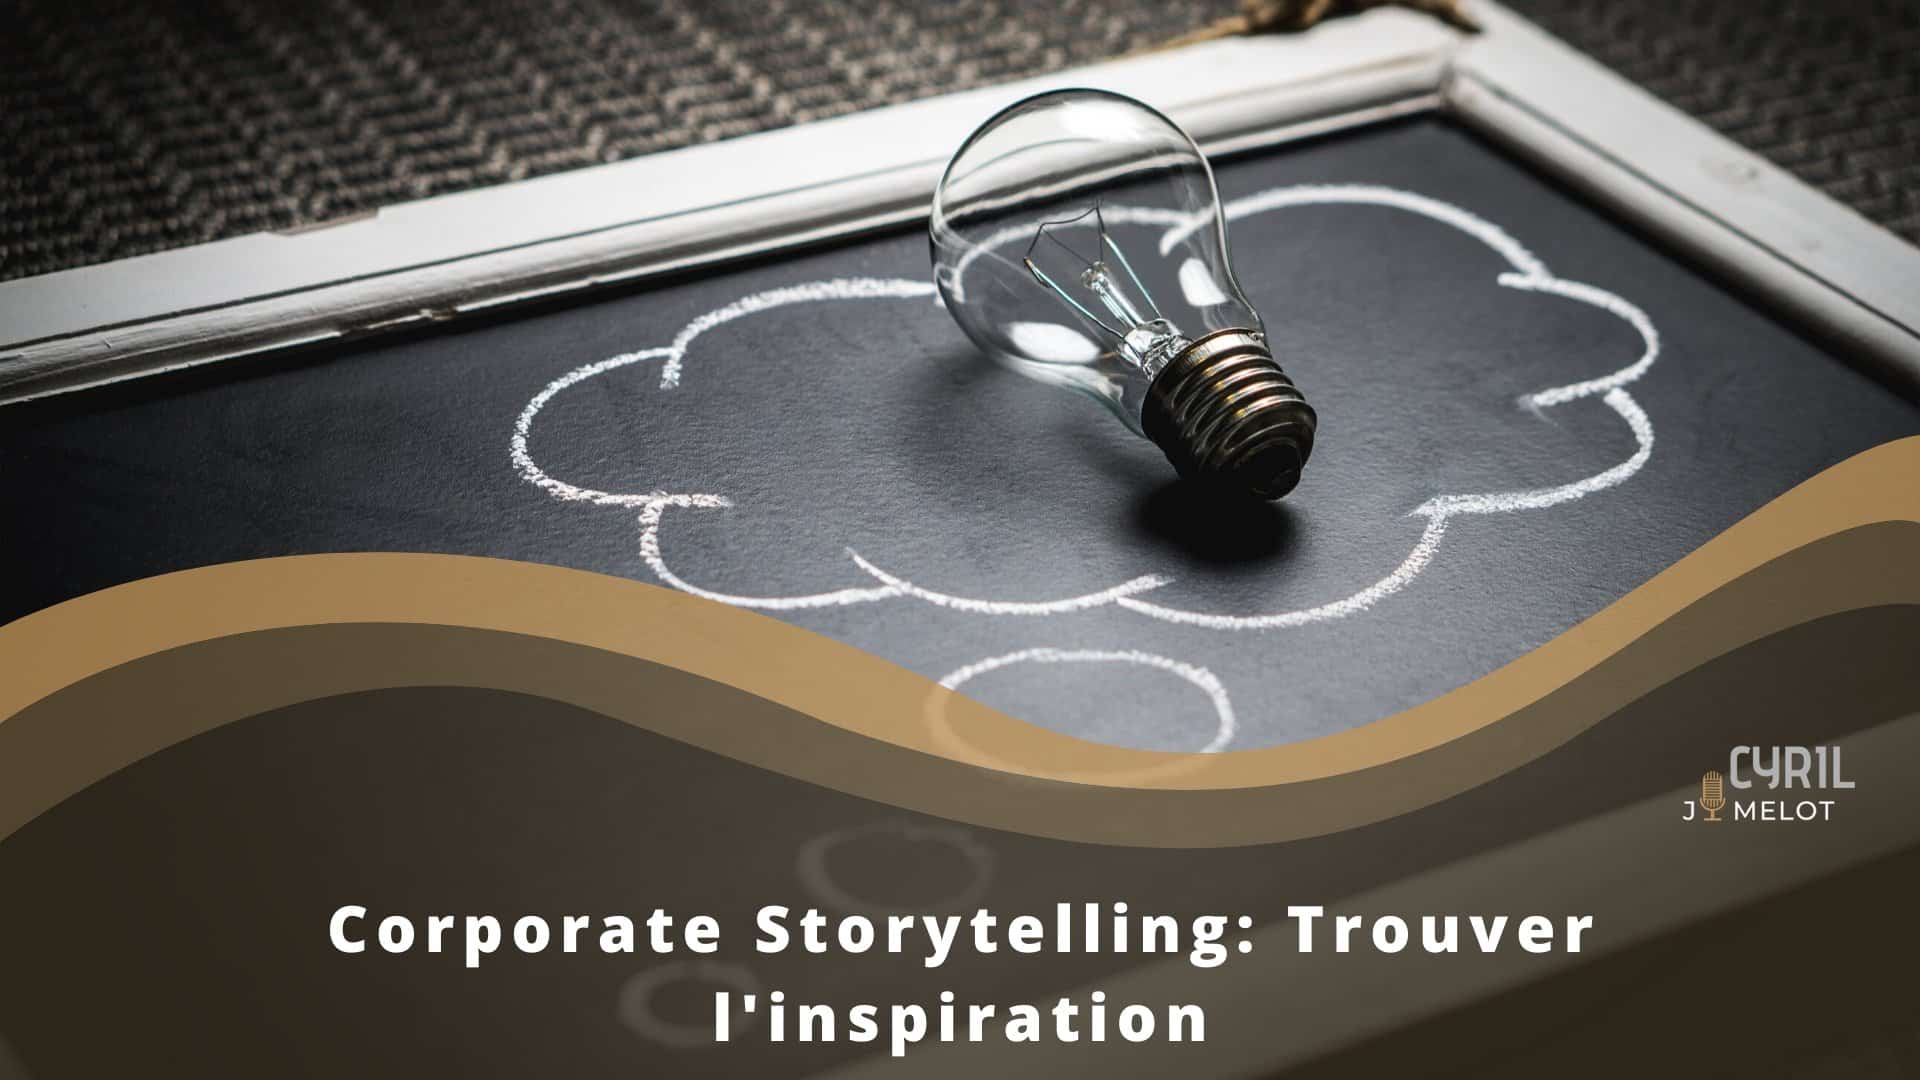 Corporate Storytelling: Trouver l'inspiration